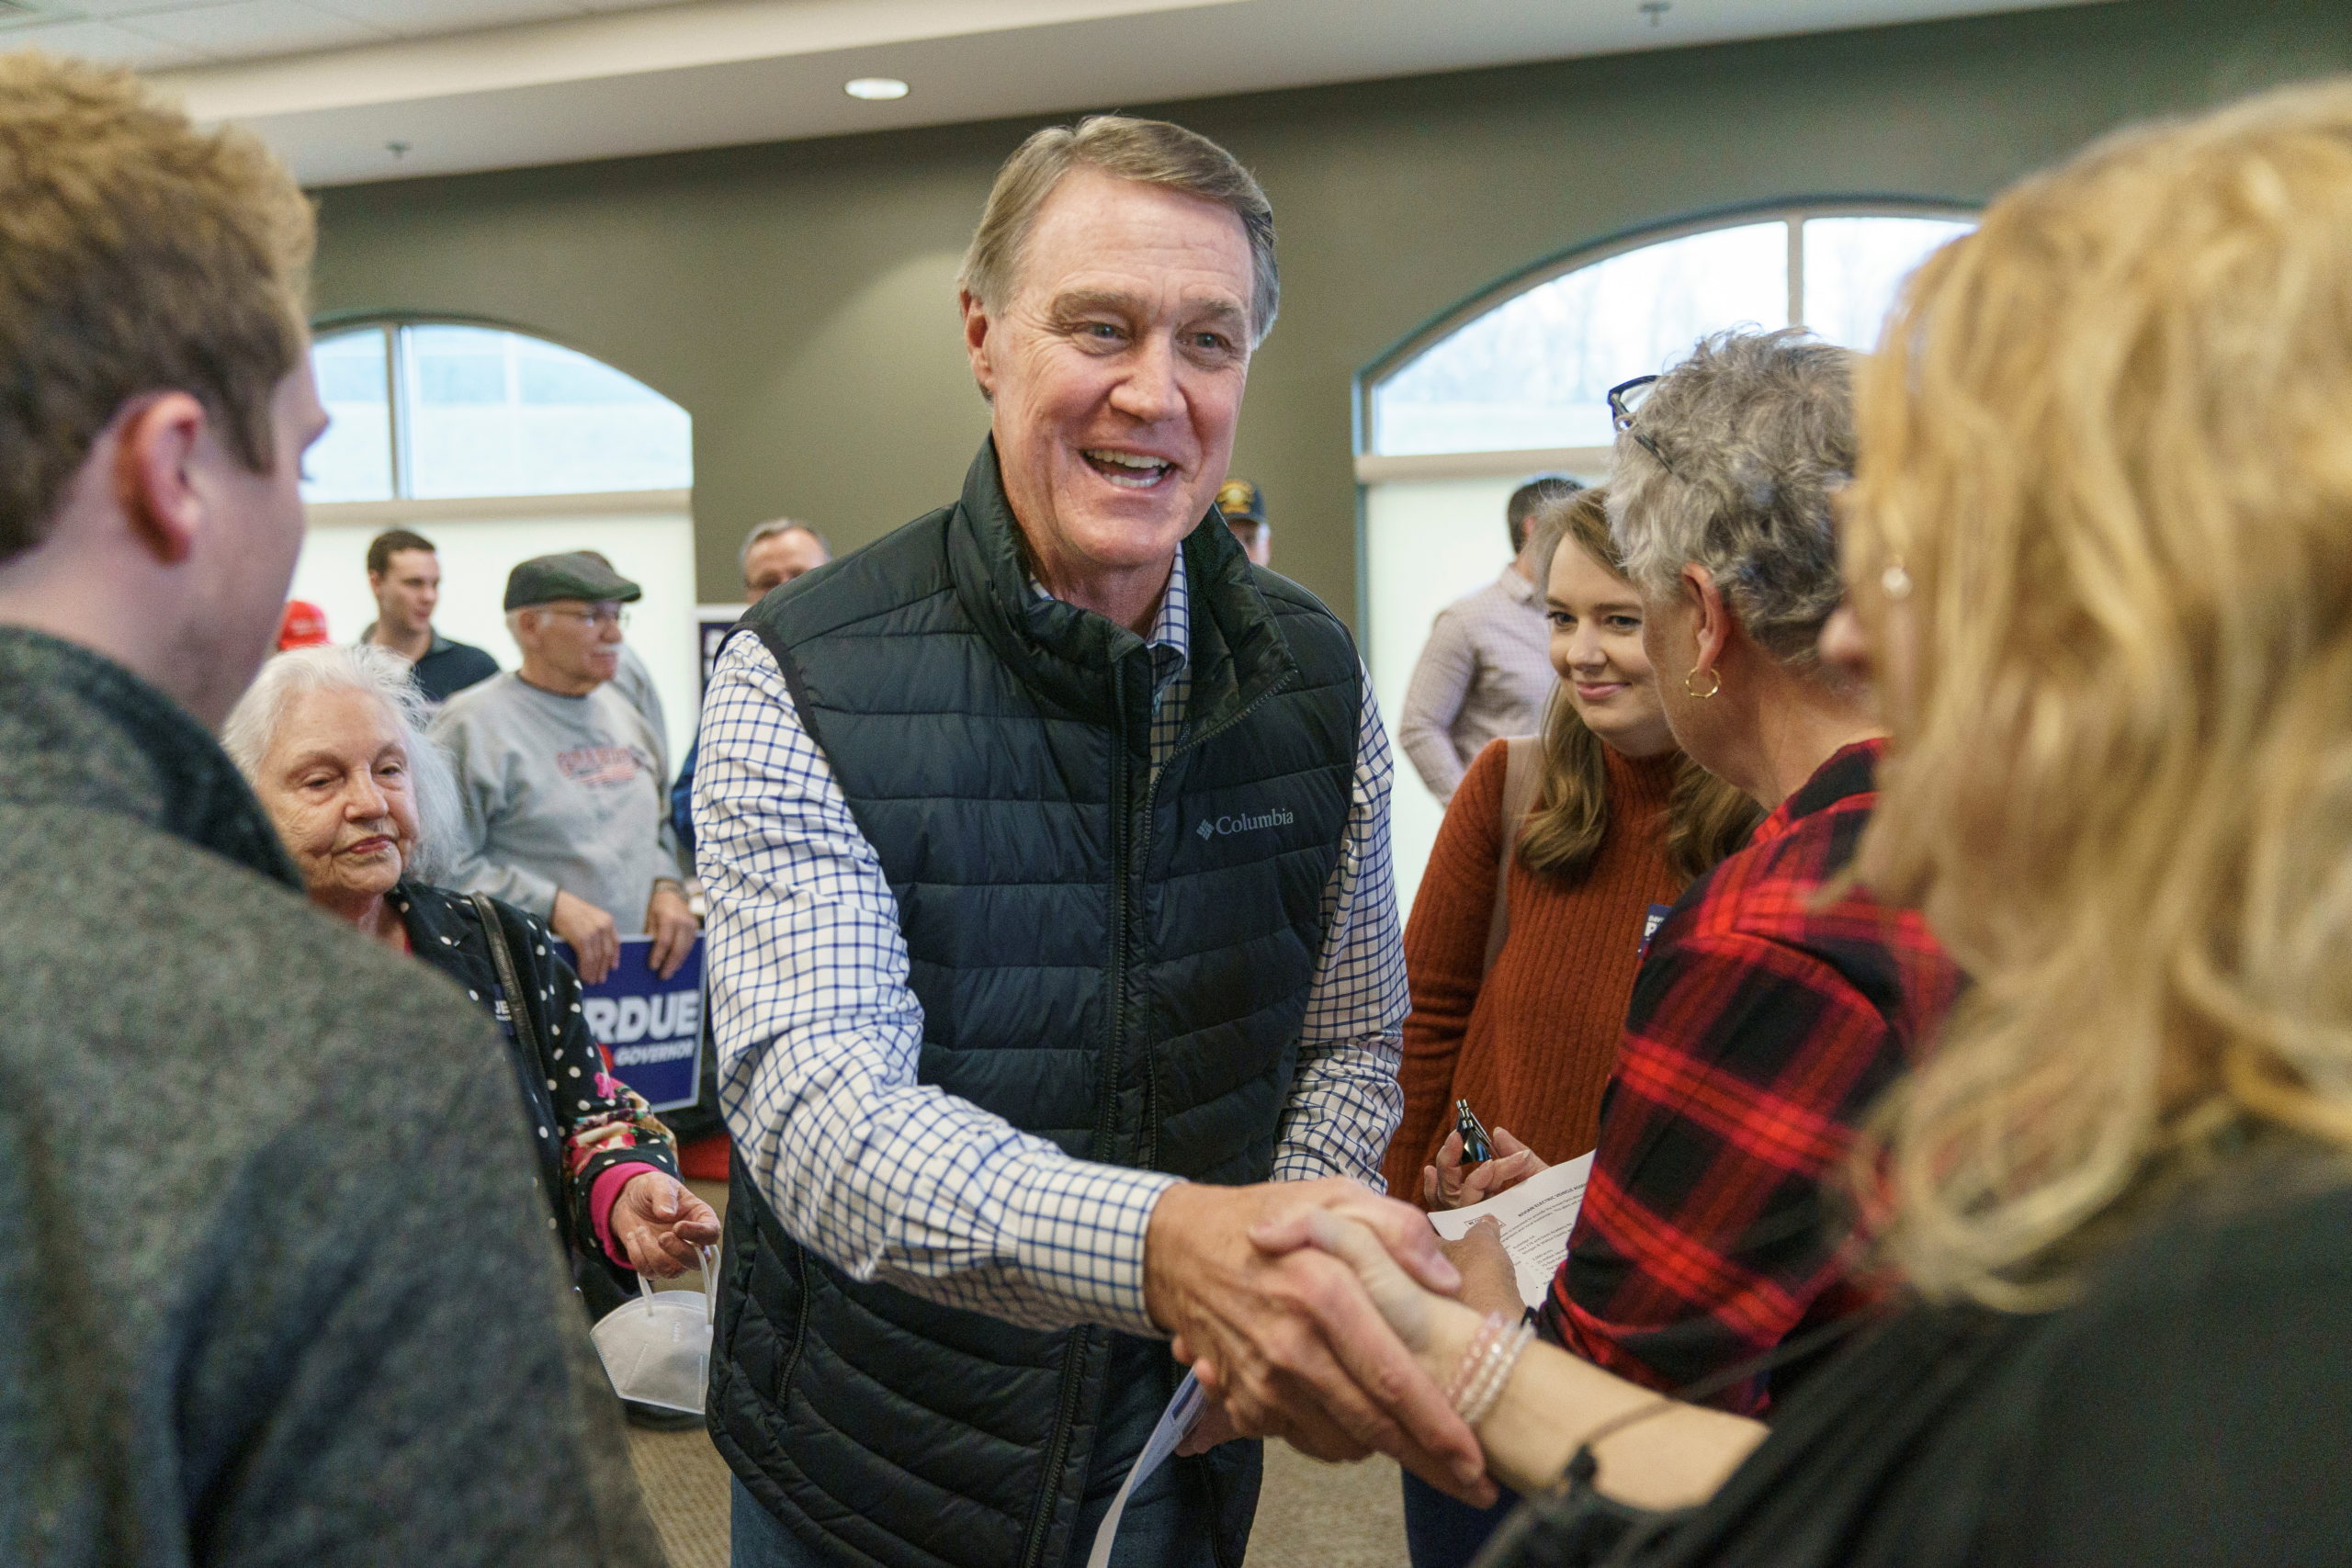 Former Republican U.S. Senator David Perdue, who is primarying incumbent Brian Kemp for Georgia governor, greets supporters following a campaign event in Covington, Georgia, U.S., February 2, 2022. REUTERS/Elijah Nouvelage